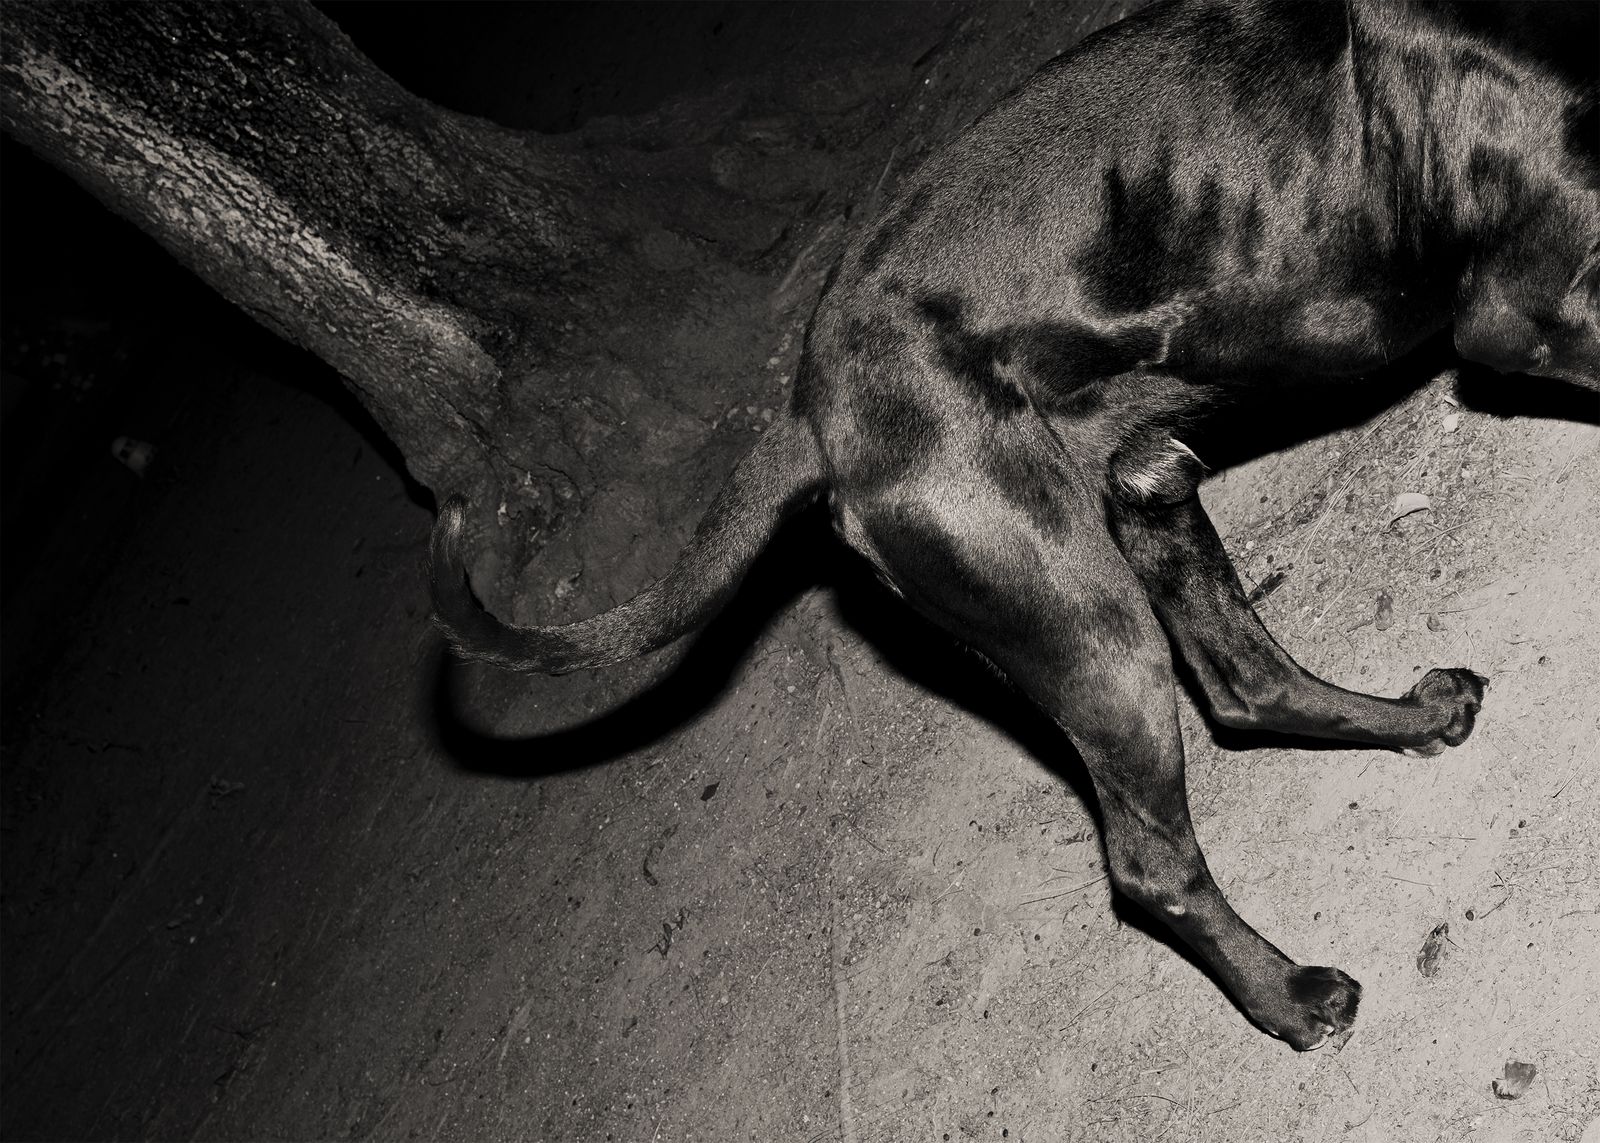 © Alessio Pellicoro - Image from the The night of the Hunter photography project